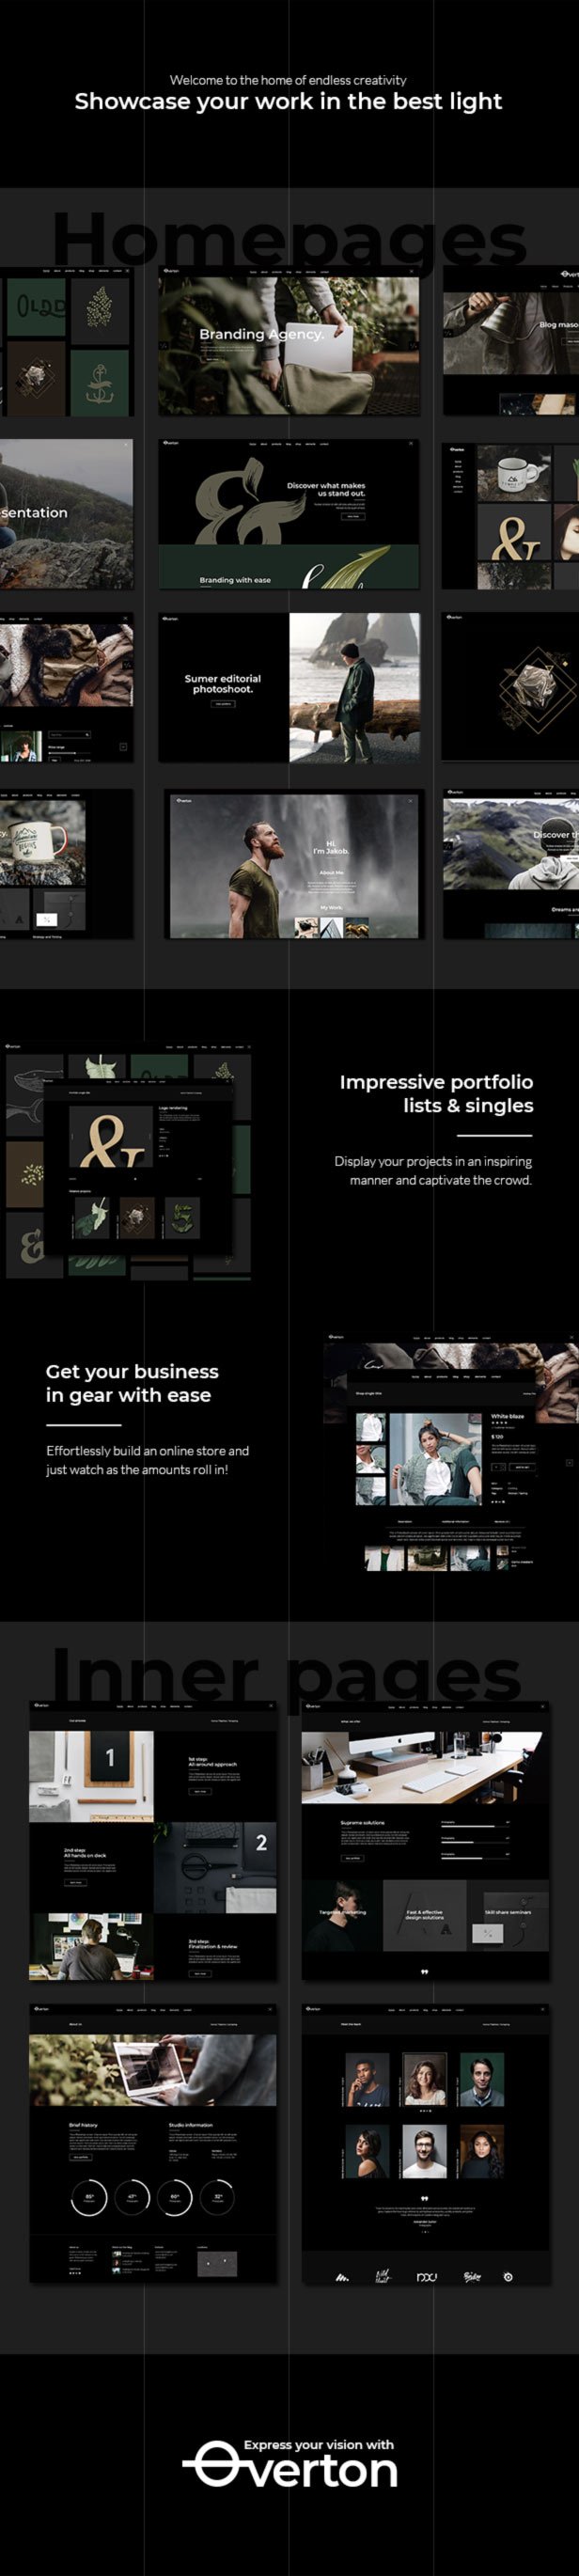 Overton - Creative Theme for Agencies and Freelancers - 1